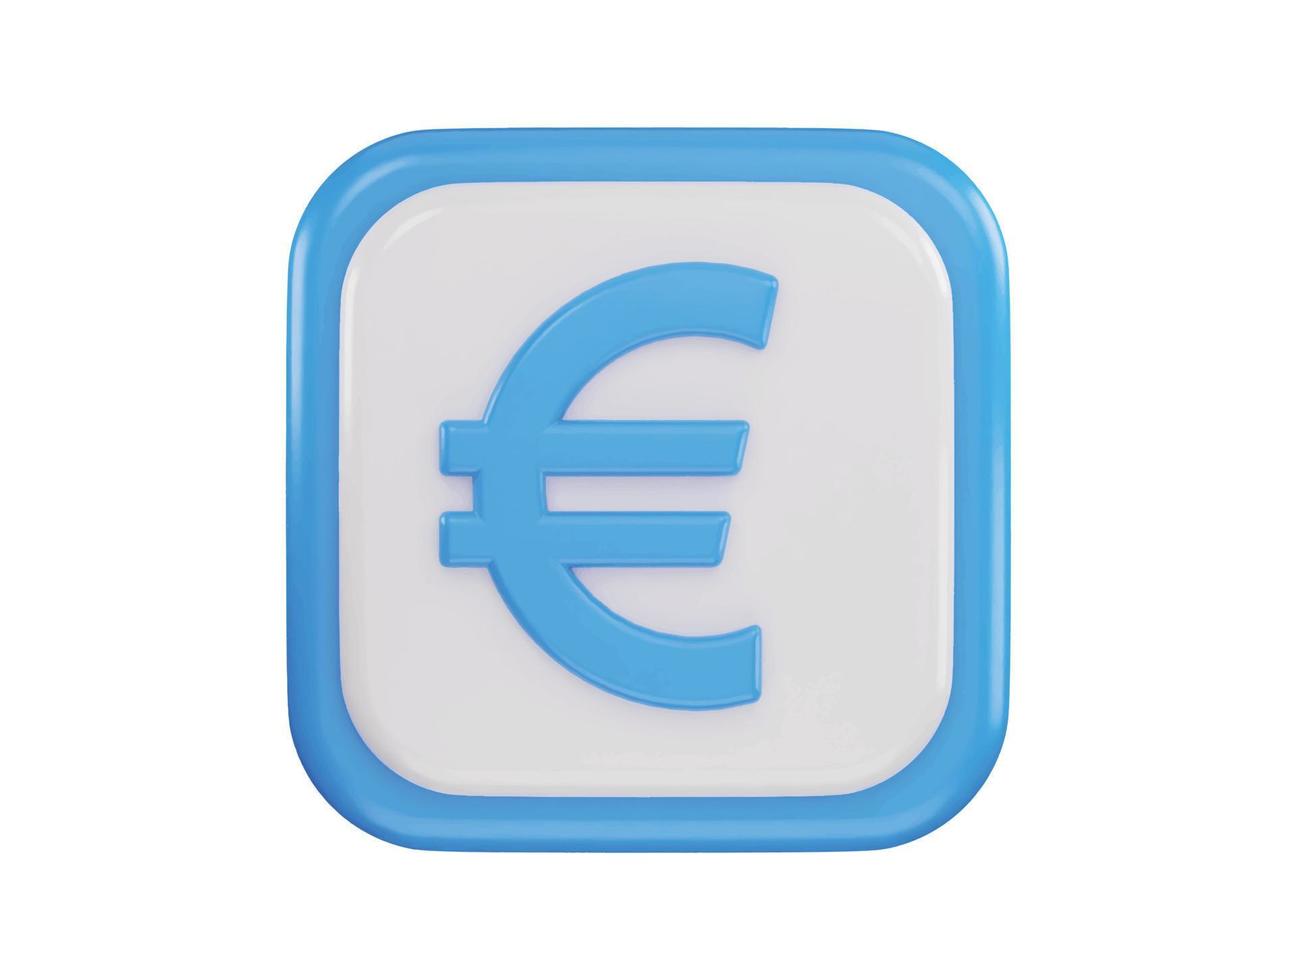 euro sign icon 3d rendering vector illustration